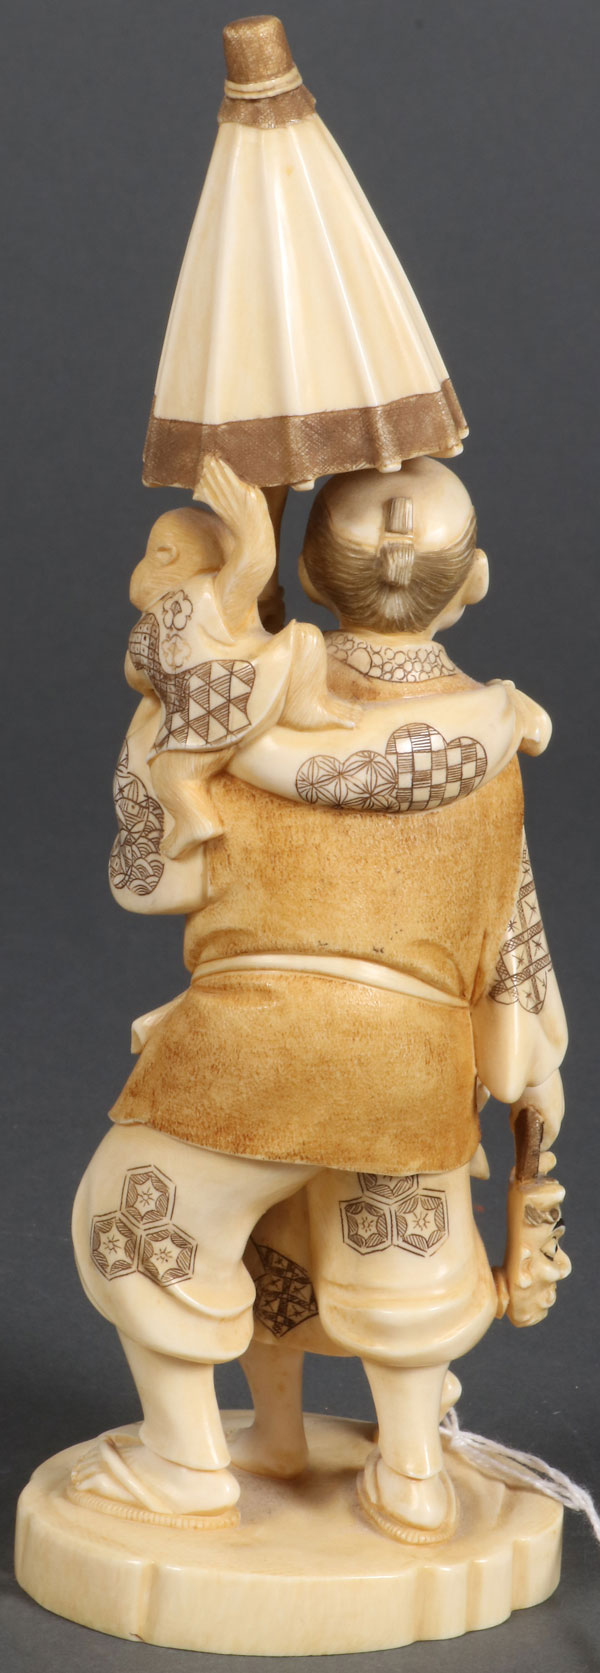 A JAPANESE CARVED IVORY OKIMONO OF AN ENTERTAINER - Image 3 of 3